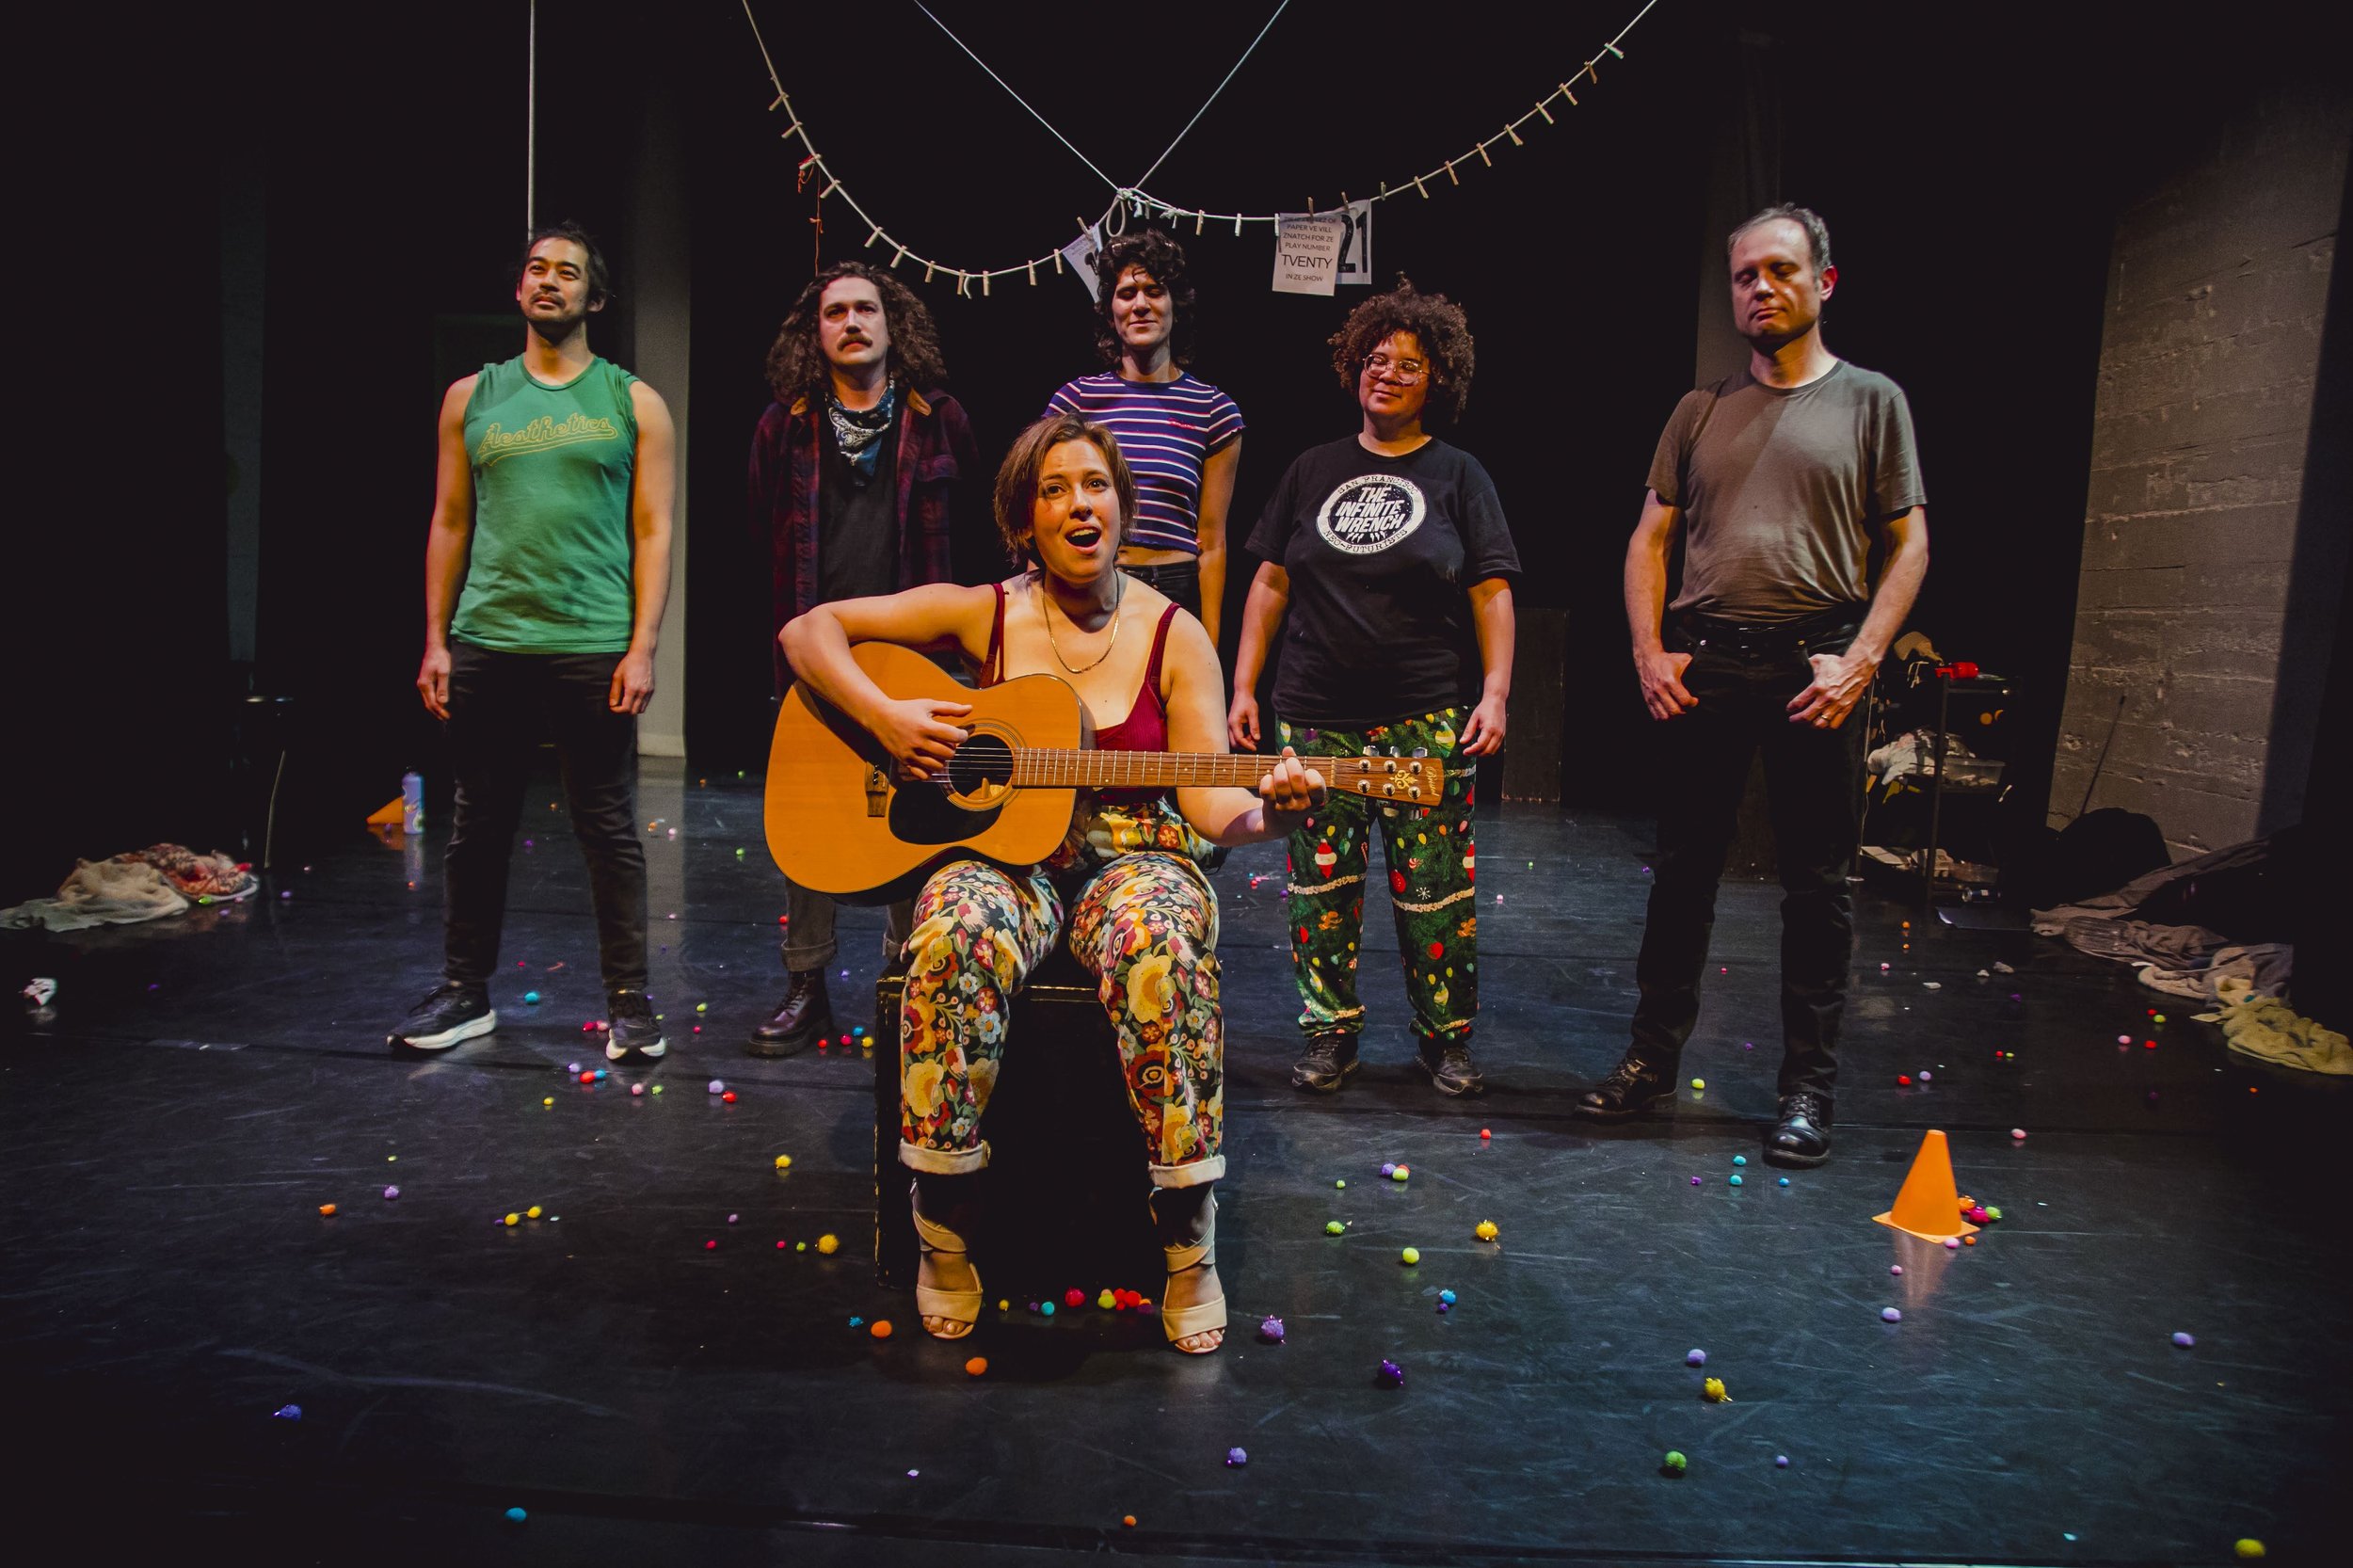 Hannah Cantor, Topher Lin, Willie Caldwell, Geulah Finman, Ray Ray, and Eli Bishop in "Not that it’s all bad, I just don’t want to anymore"